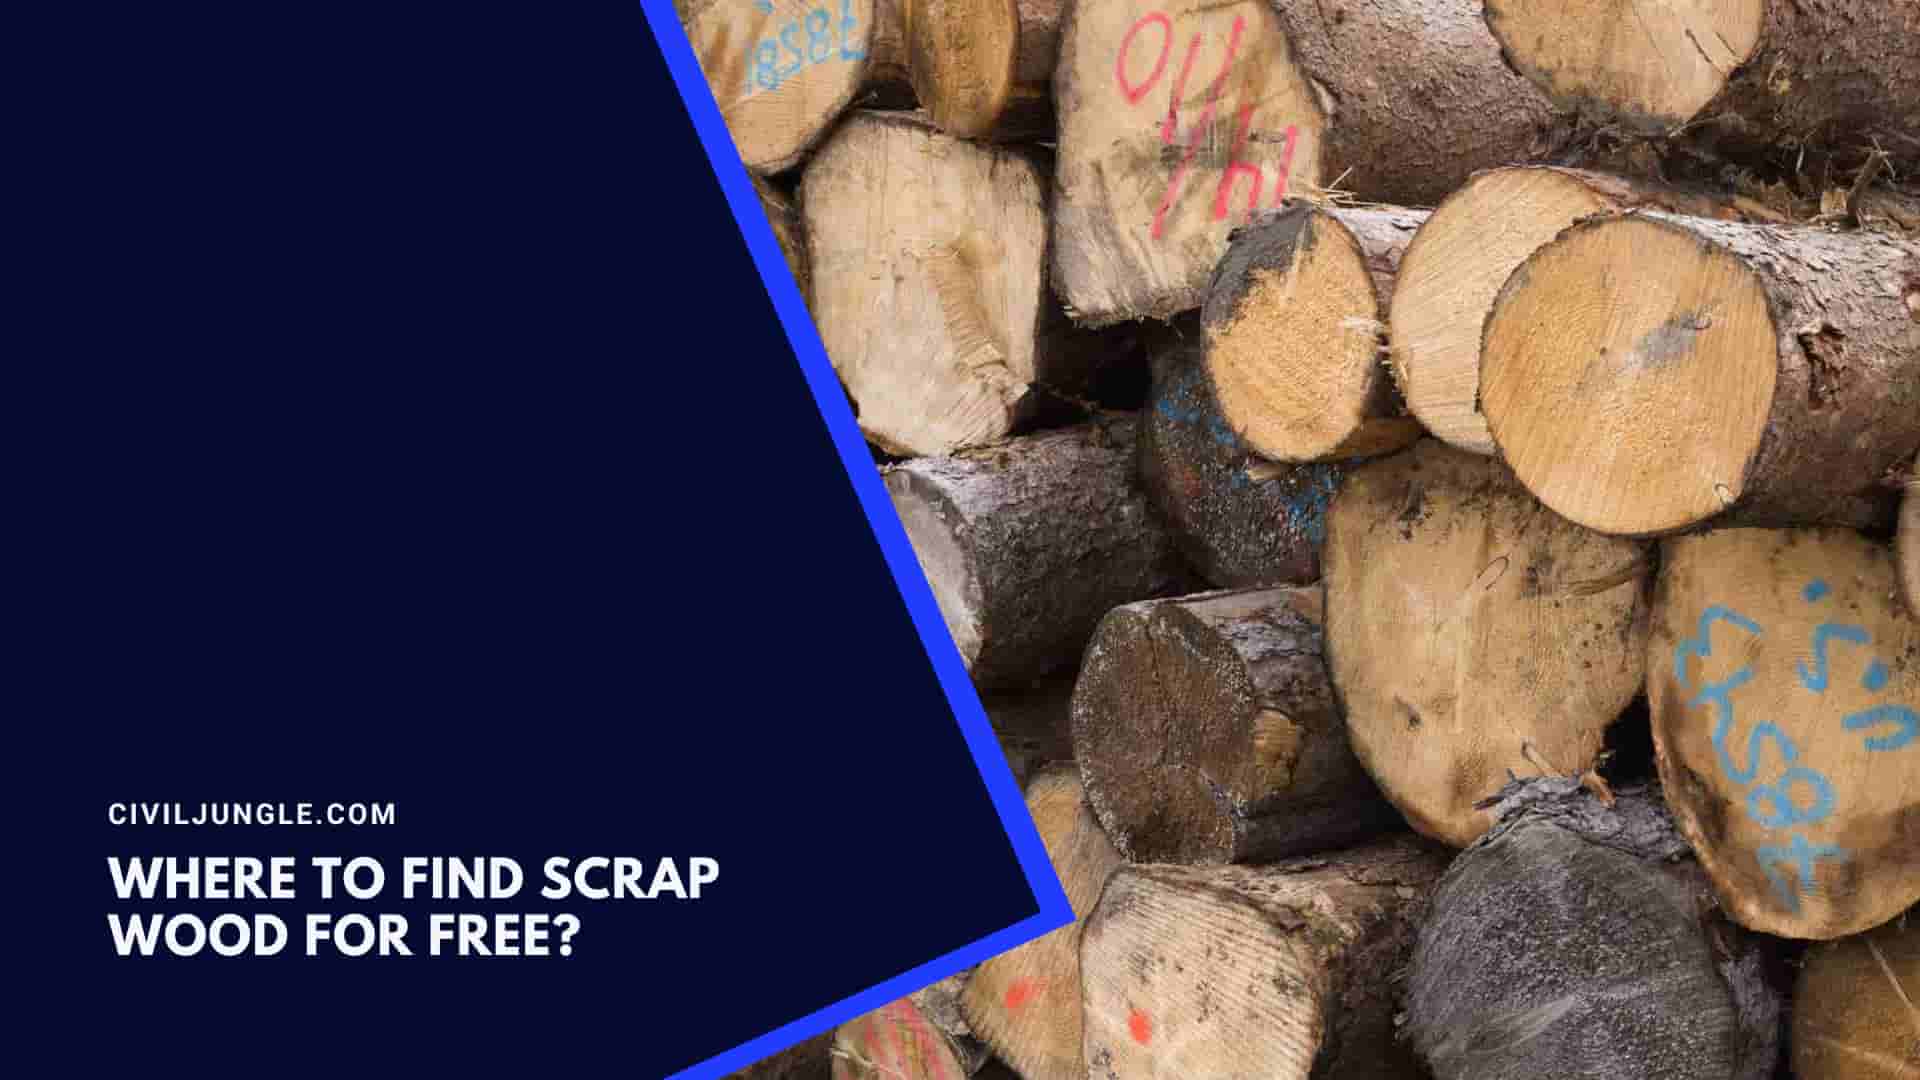 Where to Find Scrap Wood for Free?